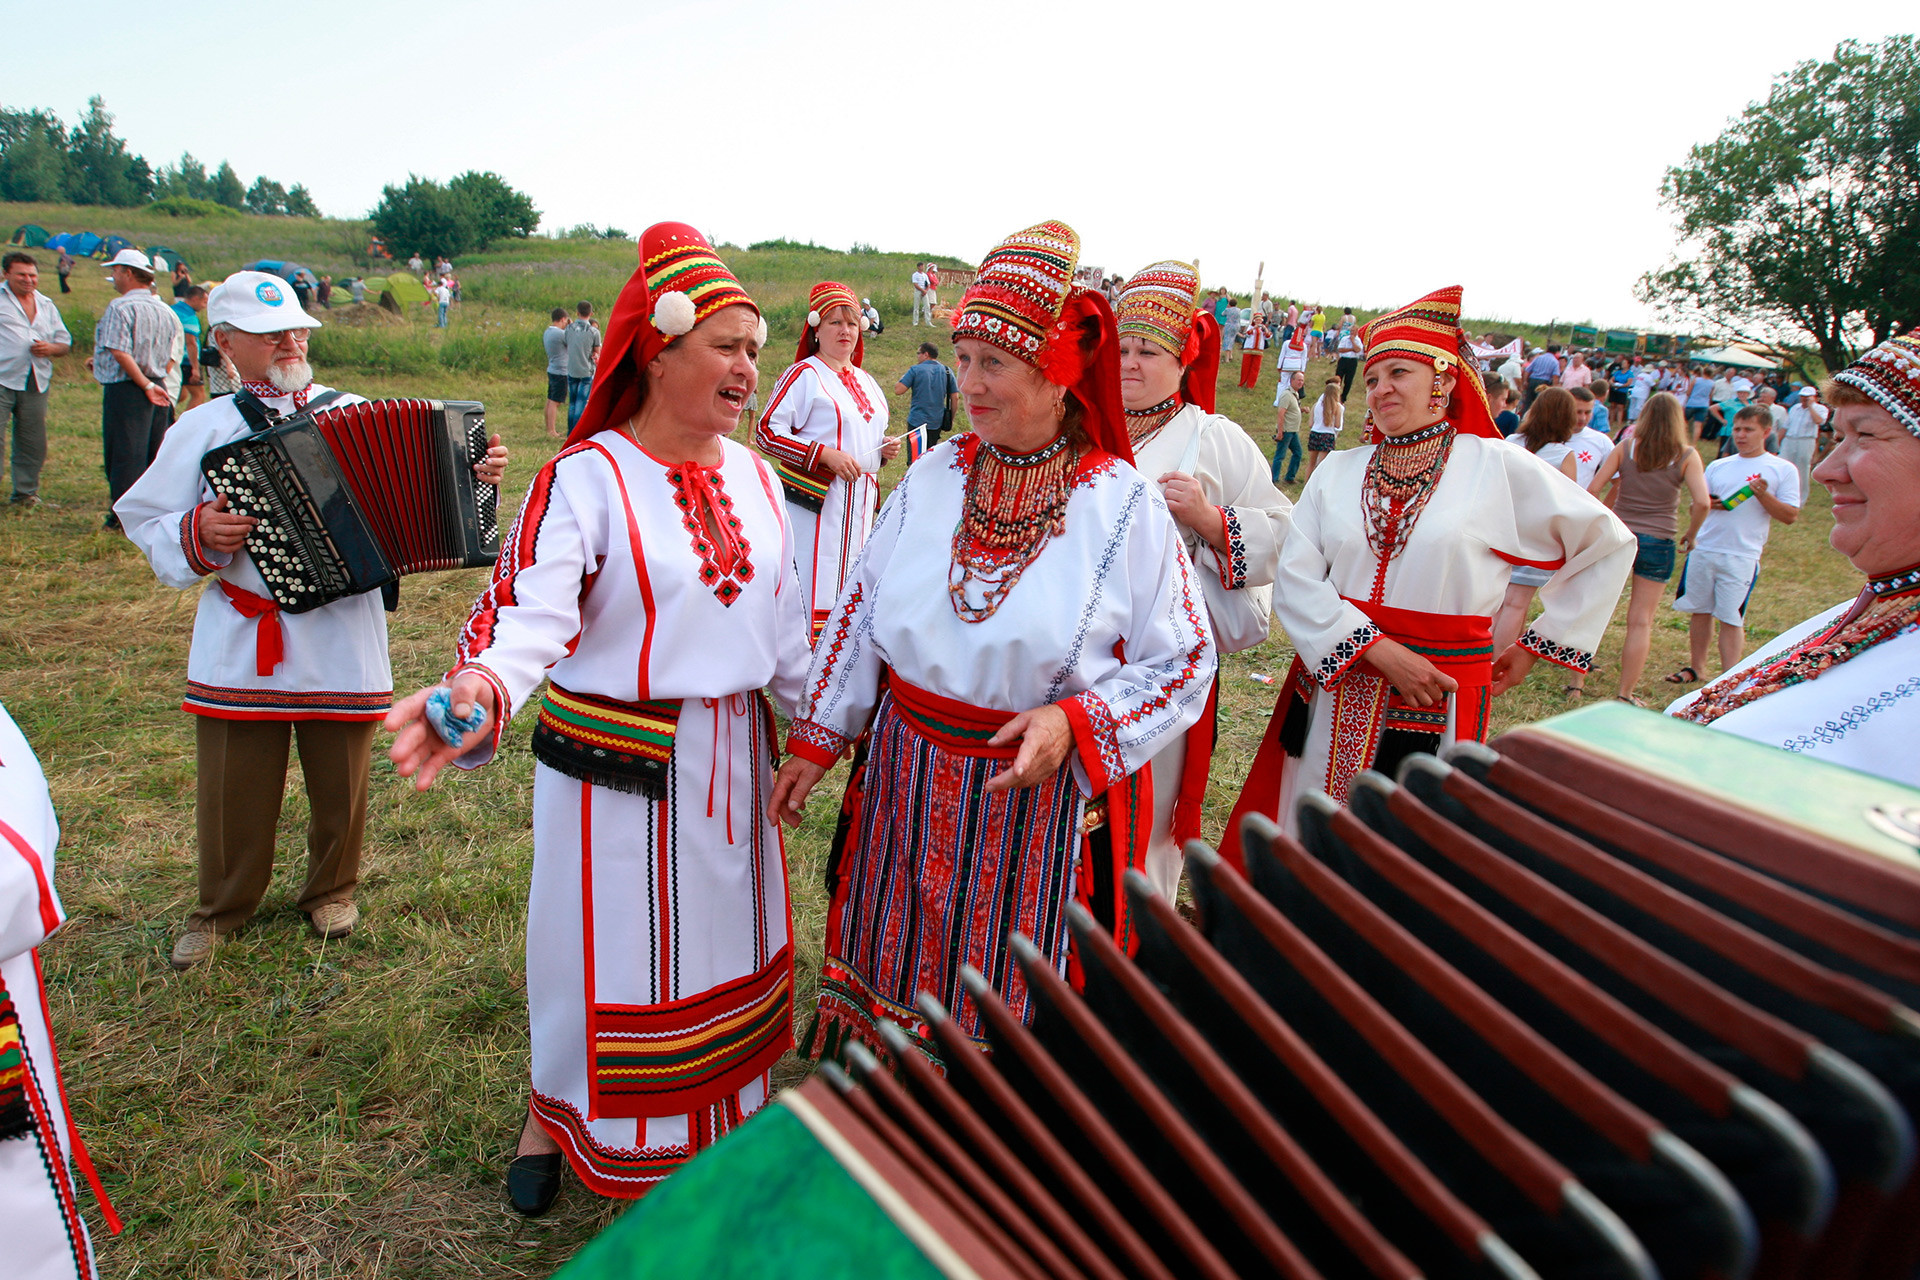 Chukaly village residents at the ethnic folklore festival in the Republic of Mordovia